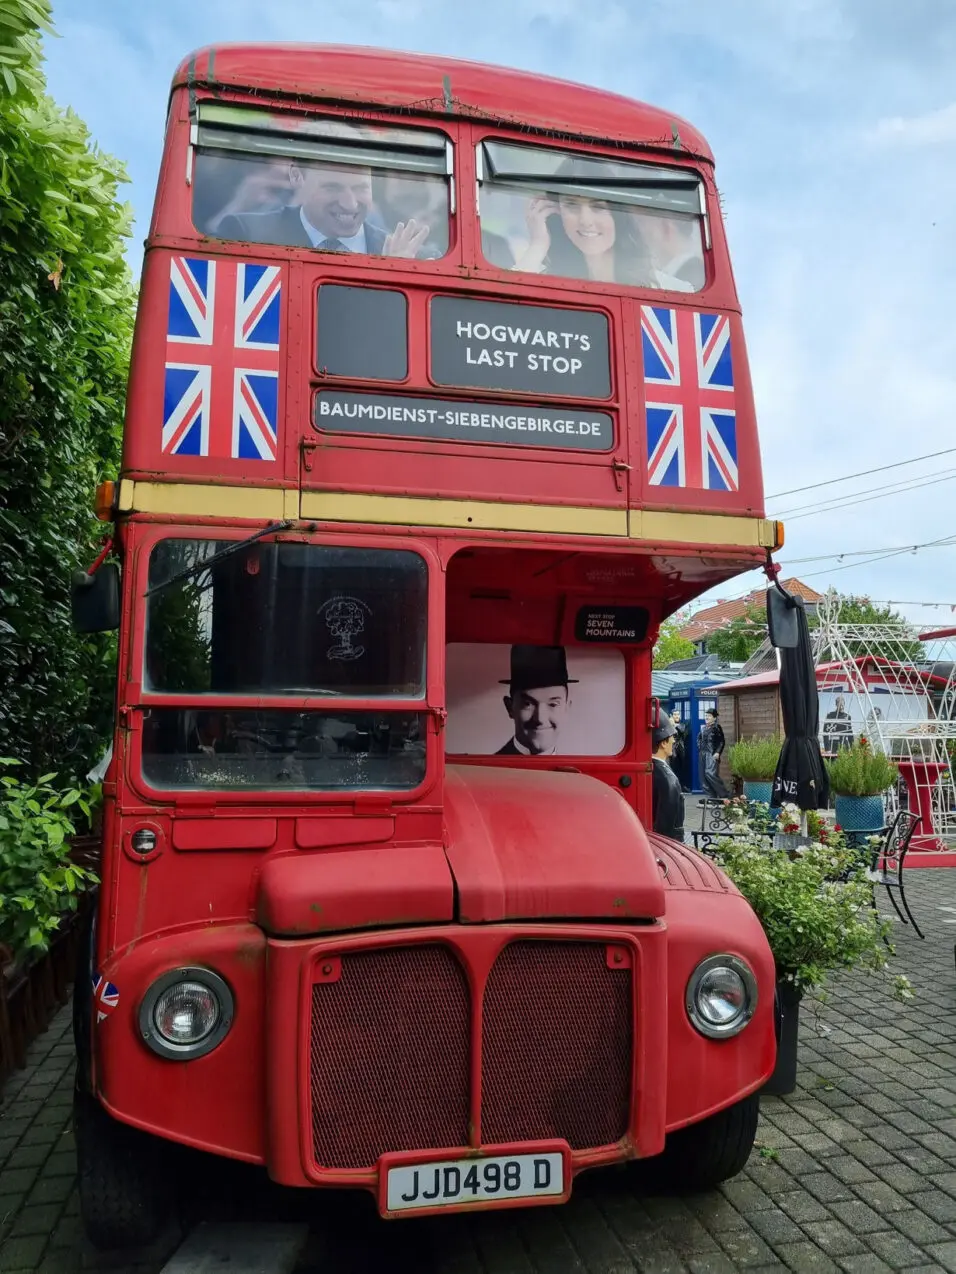 Two old Routemaster buses are the collection centerpieces.